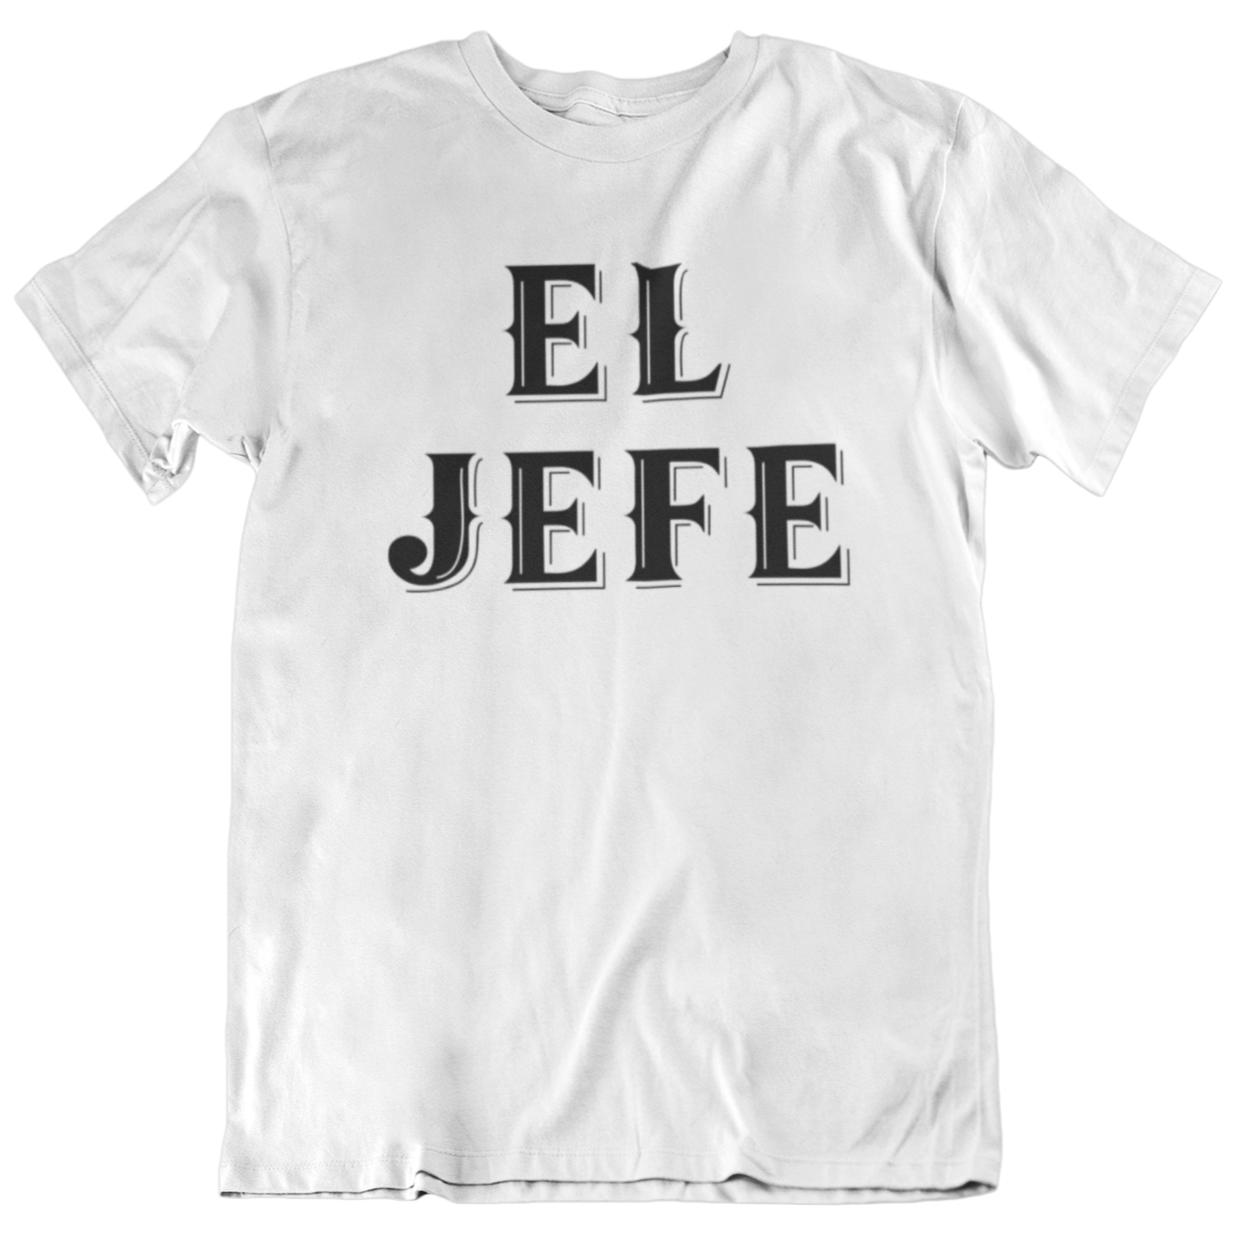 Mens Hispanic white t-shirt with "EL JEFE" in large white Old English lettering